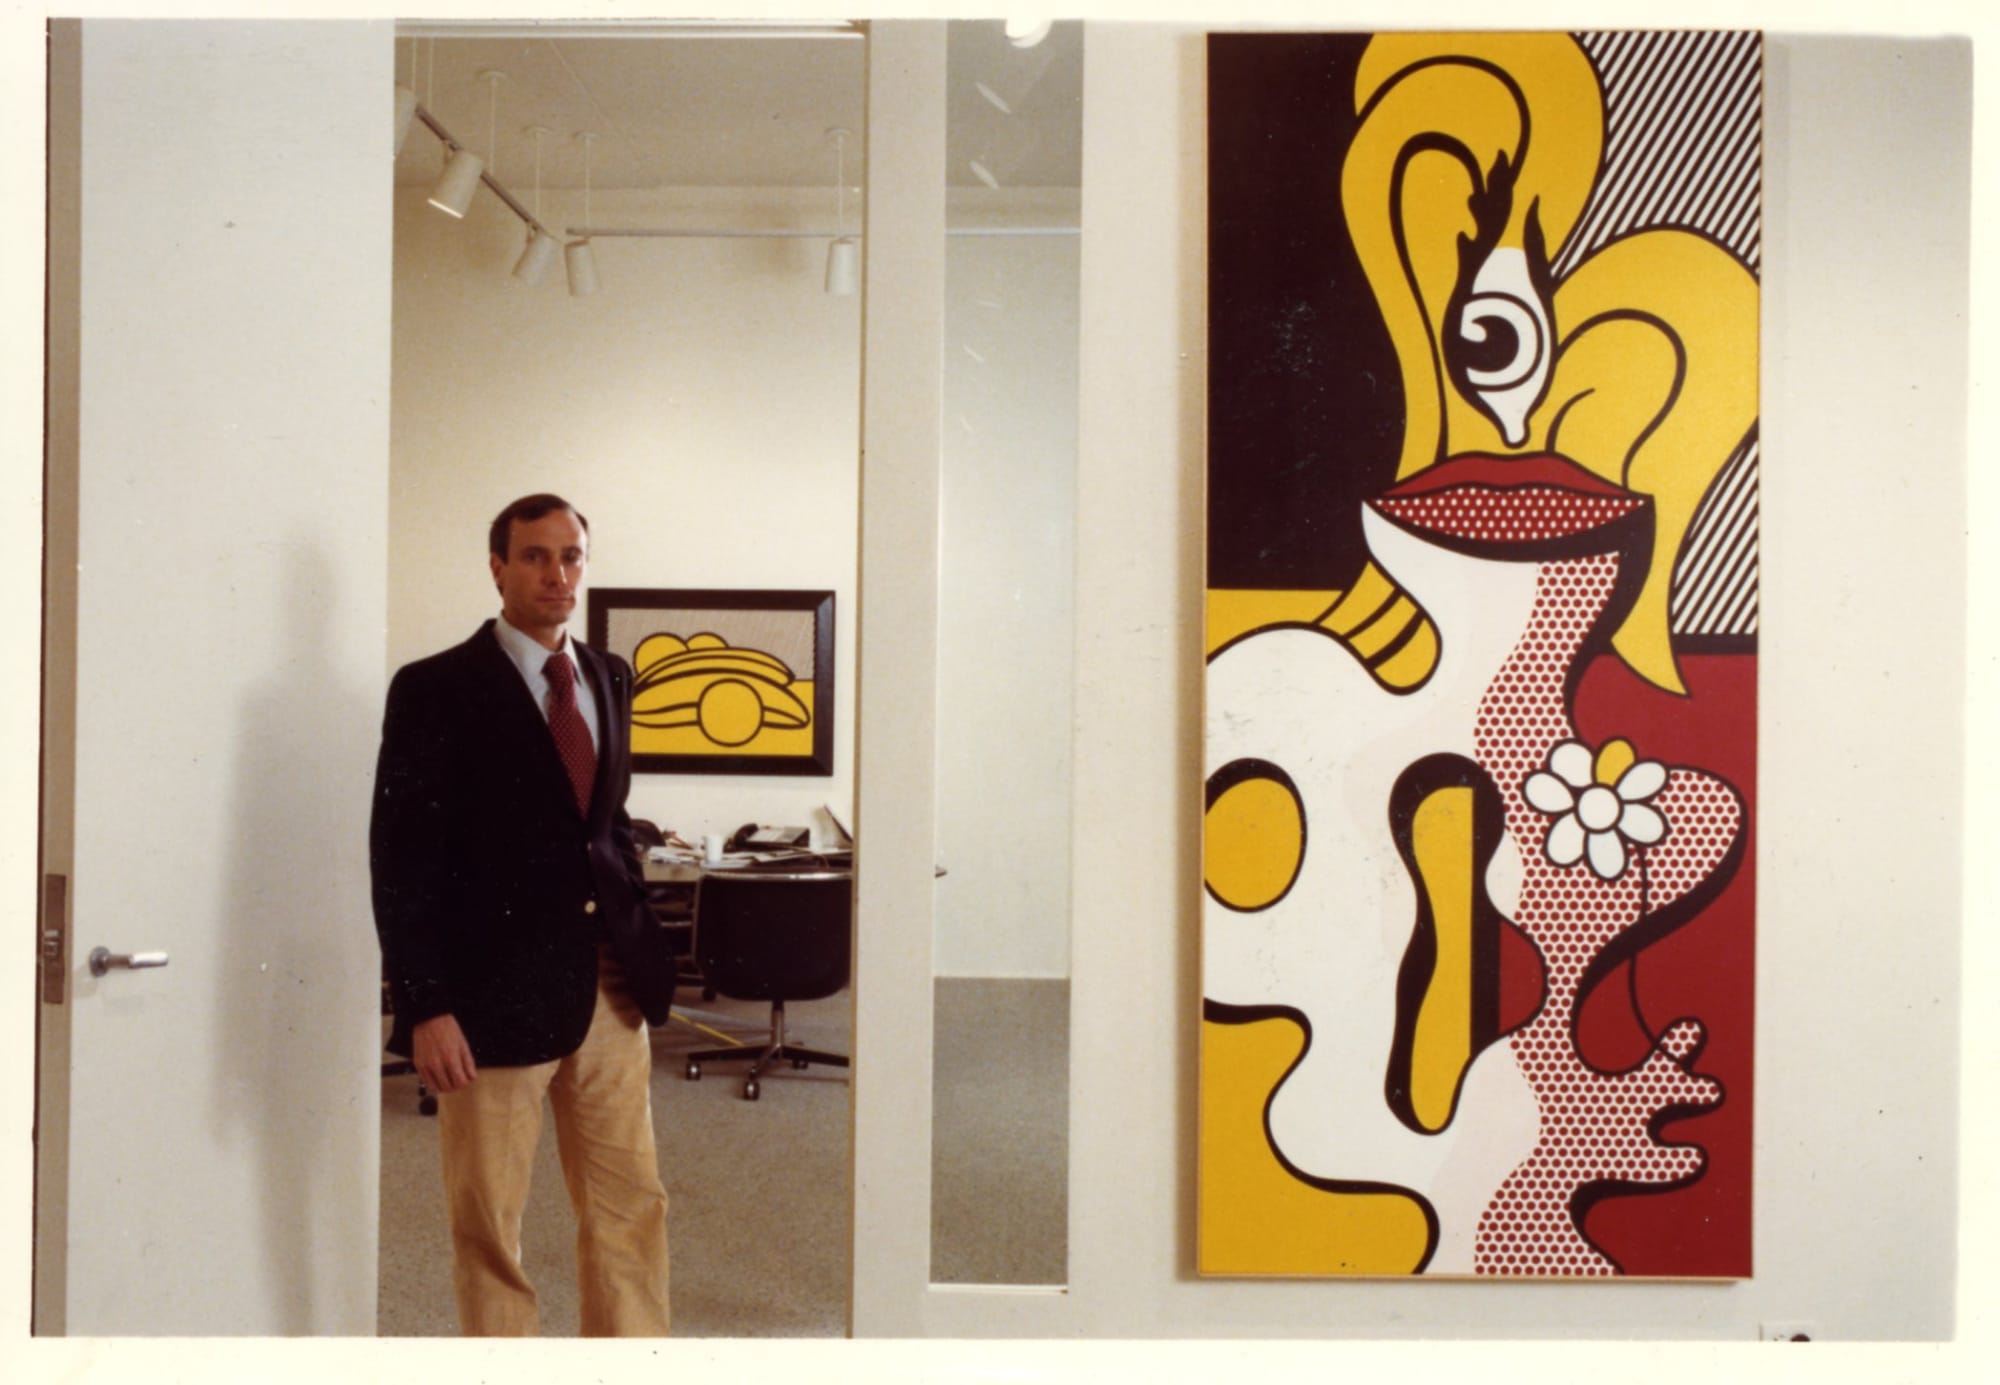 Ronnie at Greenberg Gallery in 1973